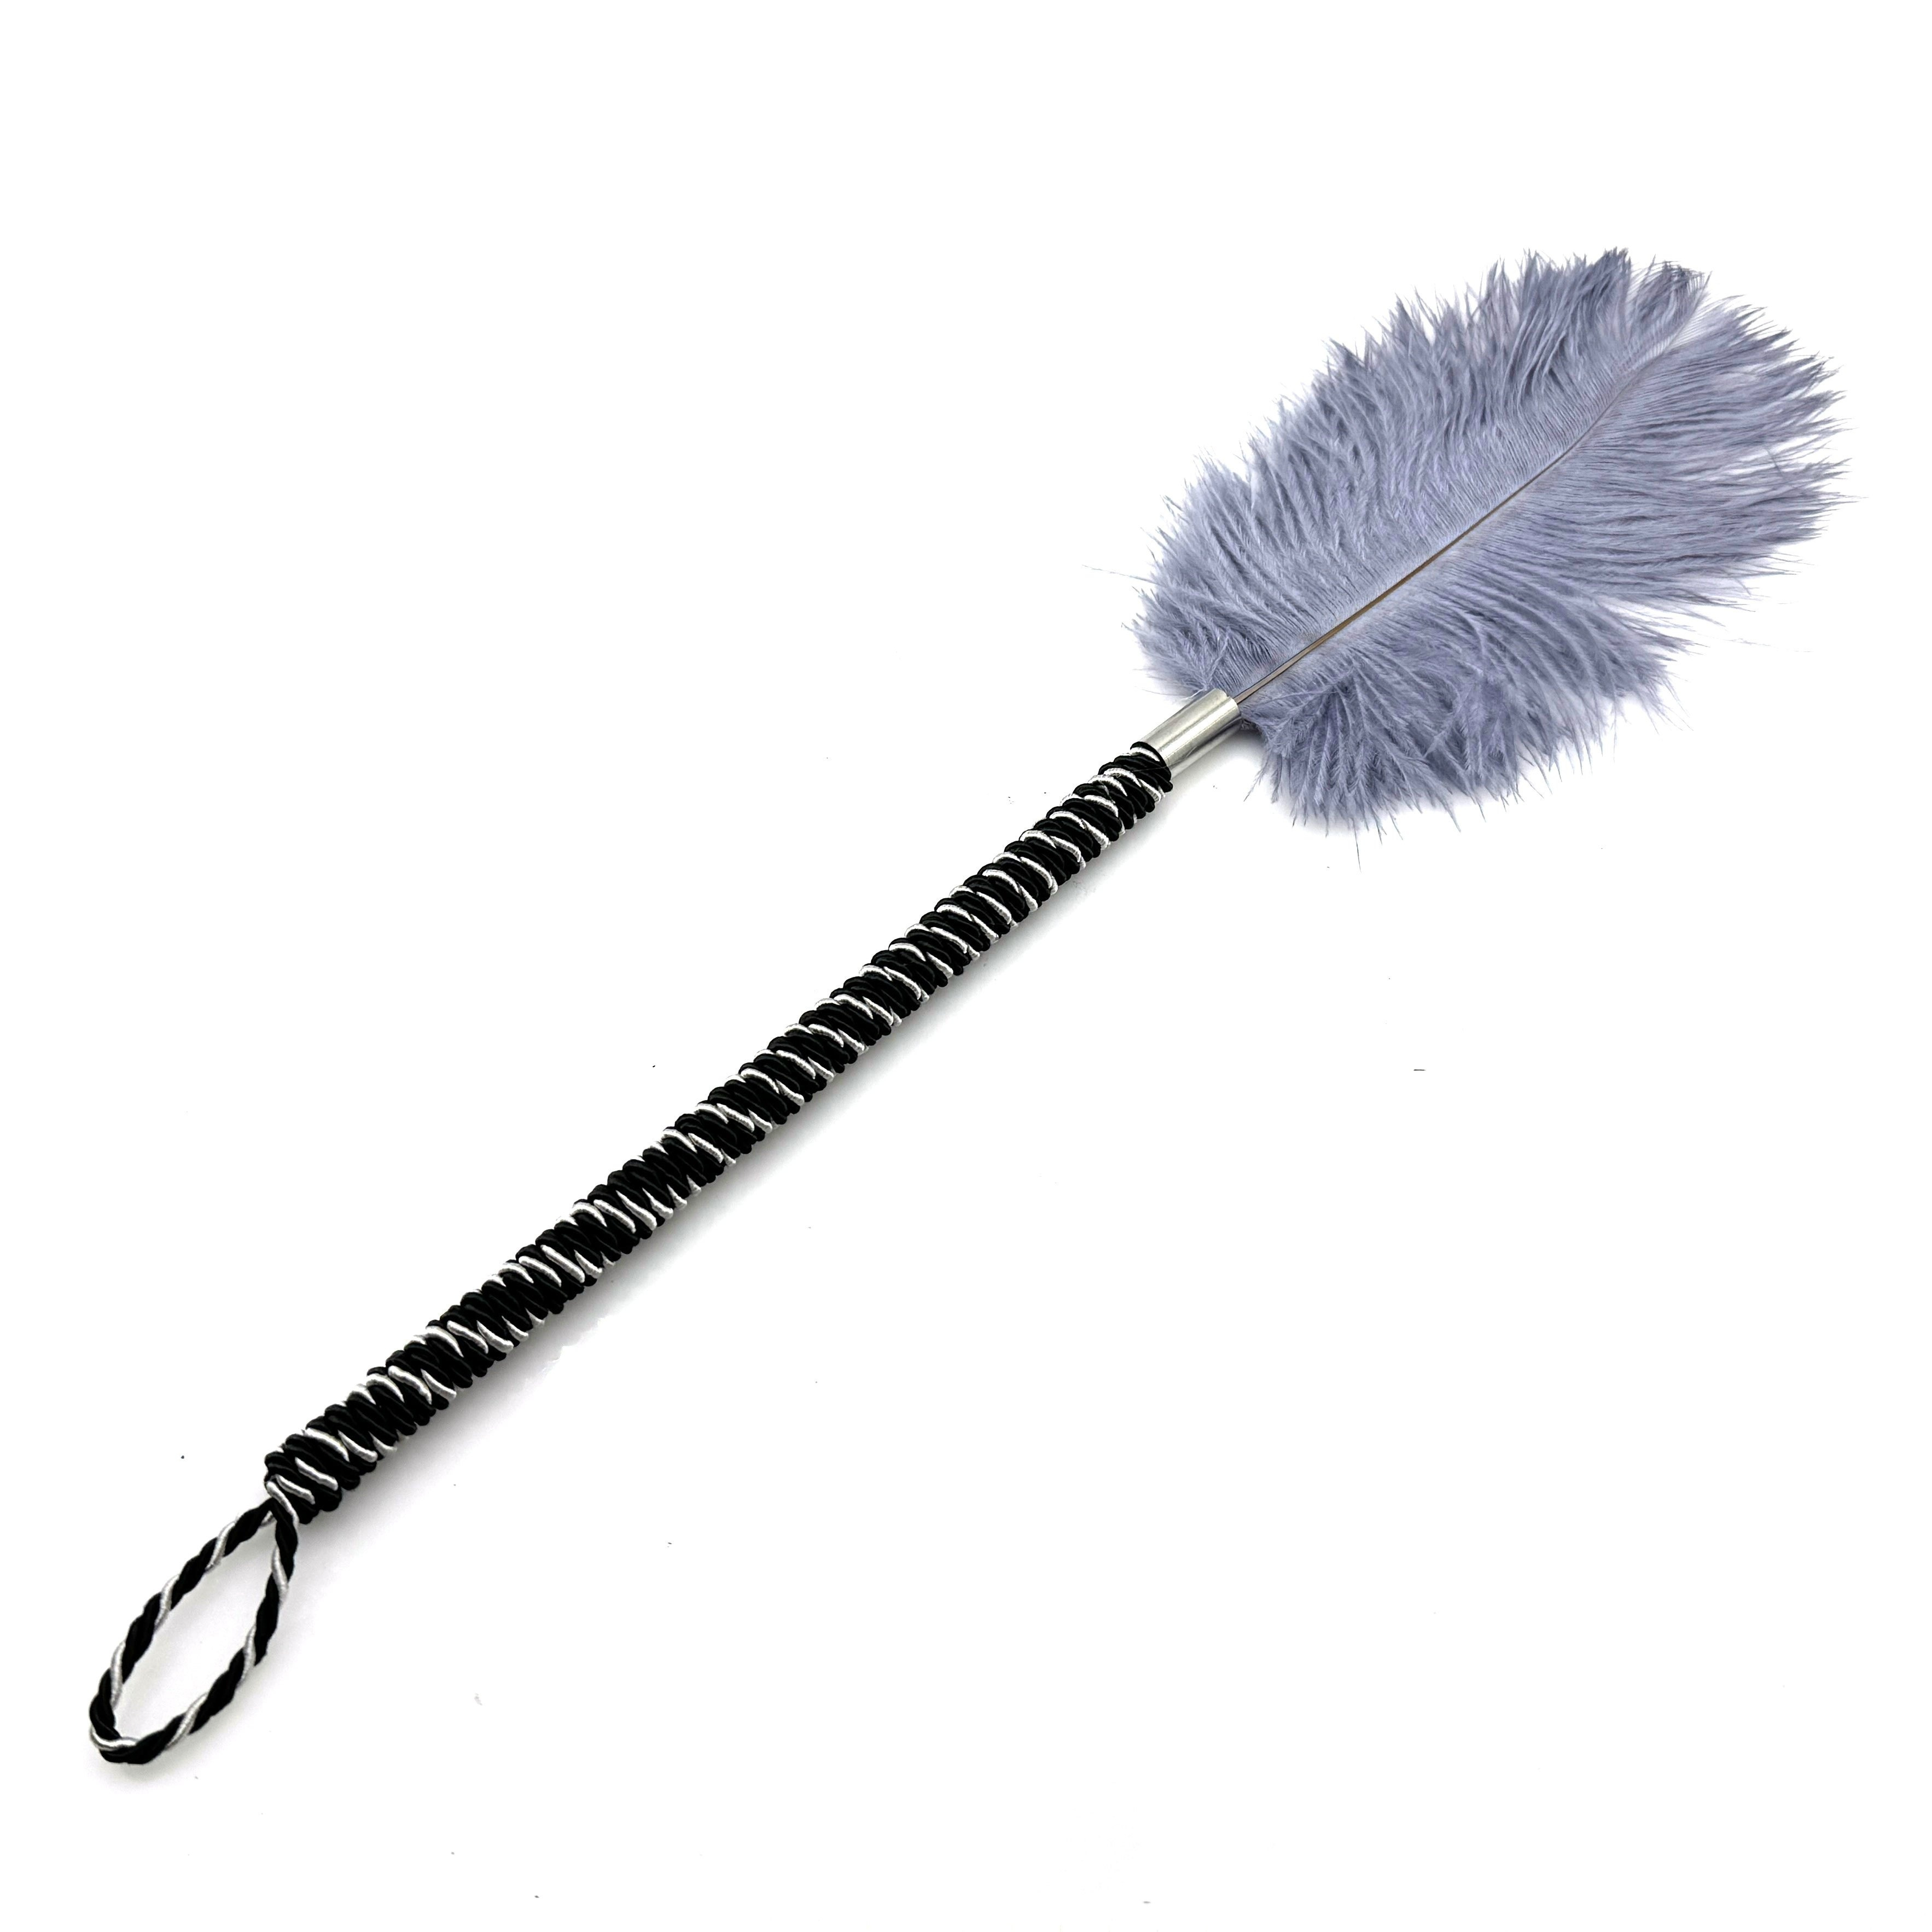 

Imitation Ostrich Feather Duster, Imitation Feather Whip, Movie Prop Whip, Imitation Feather Whip, Halloween Prop, Handicraft Imitation Feather Whip